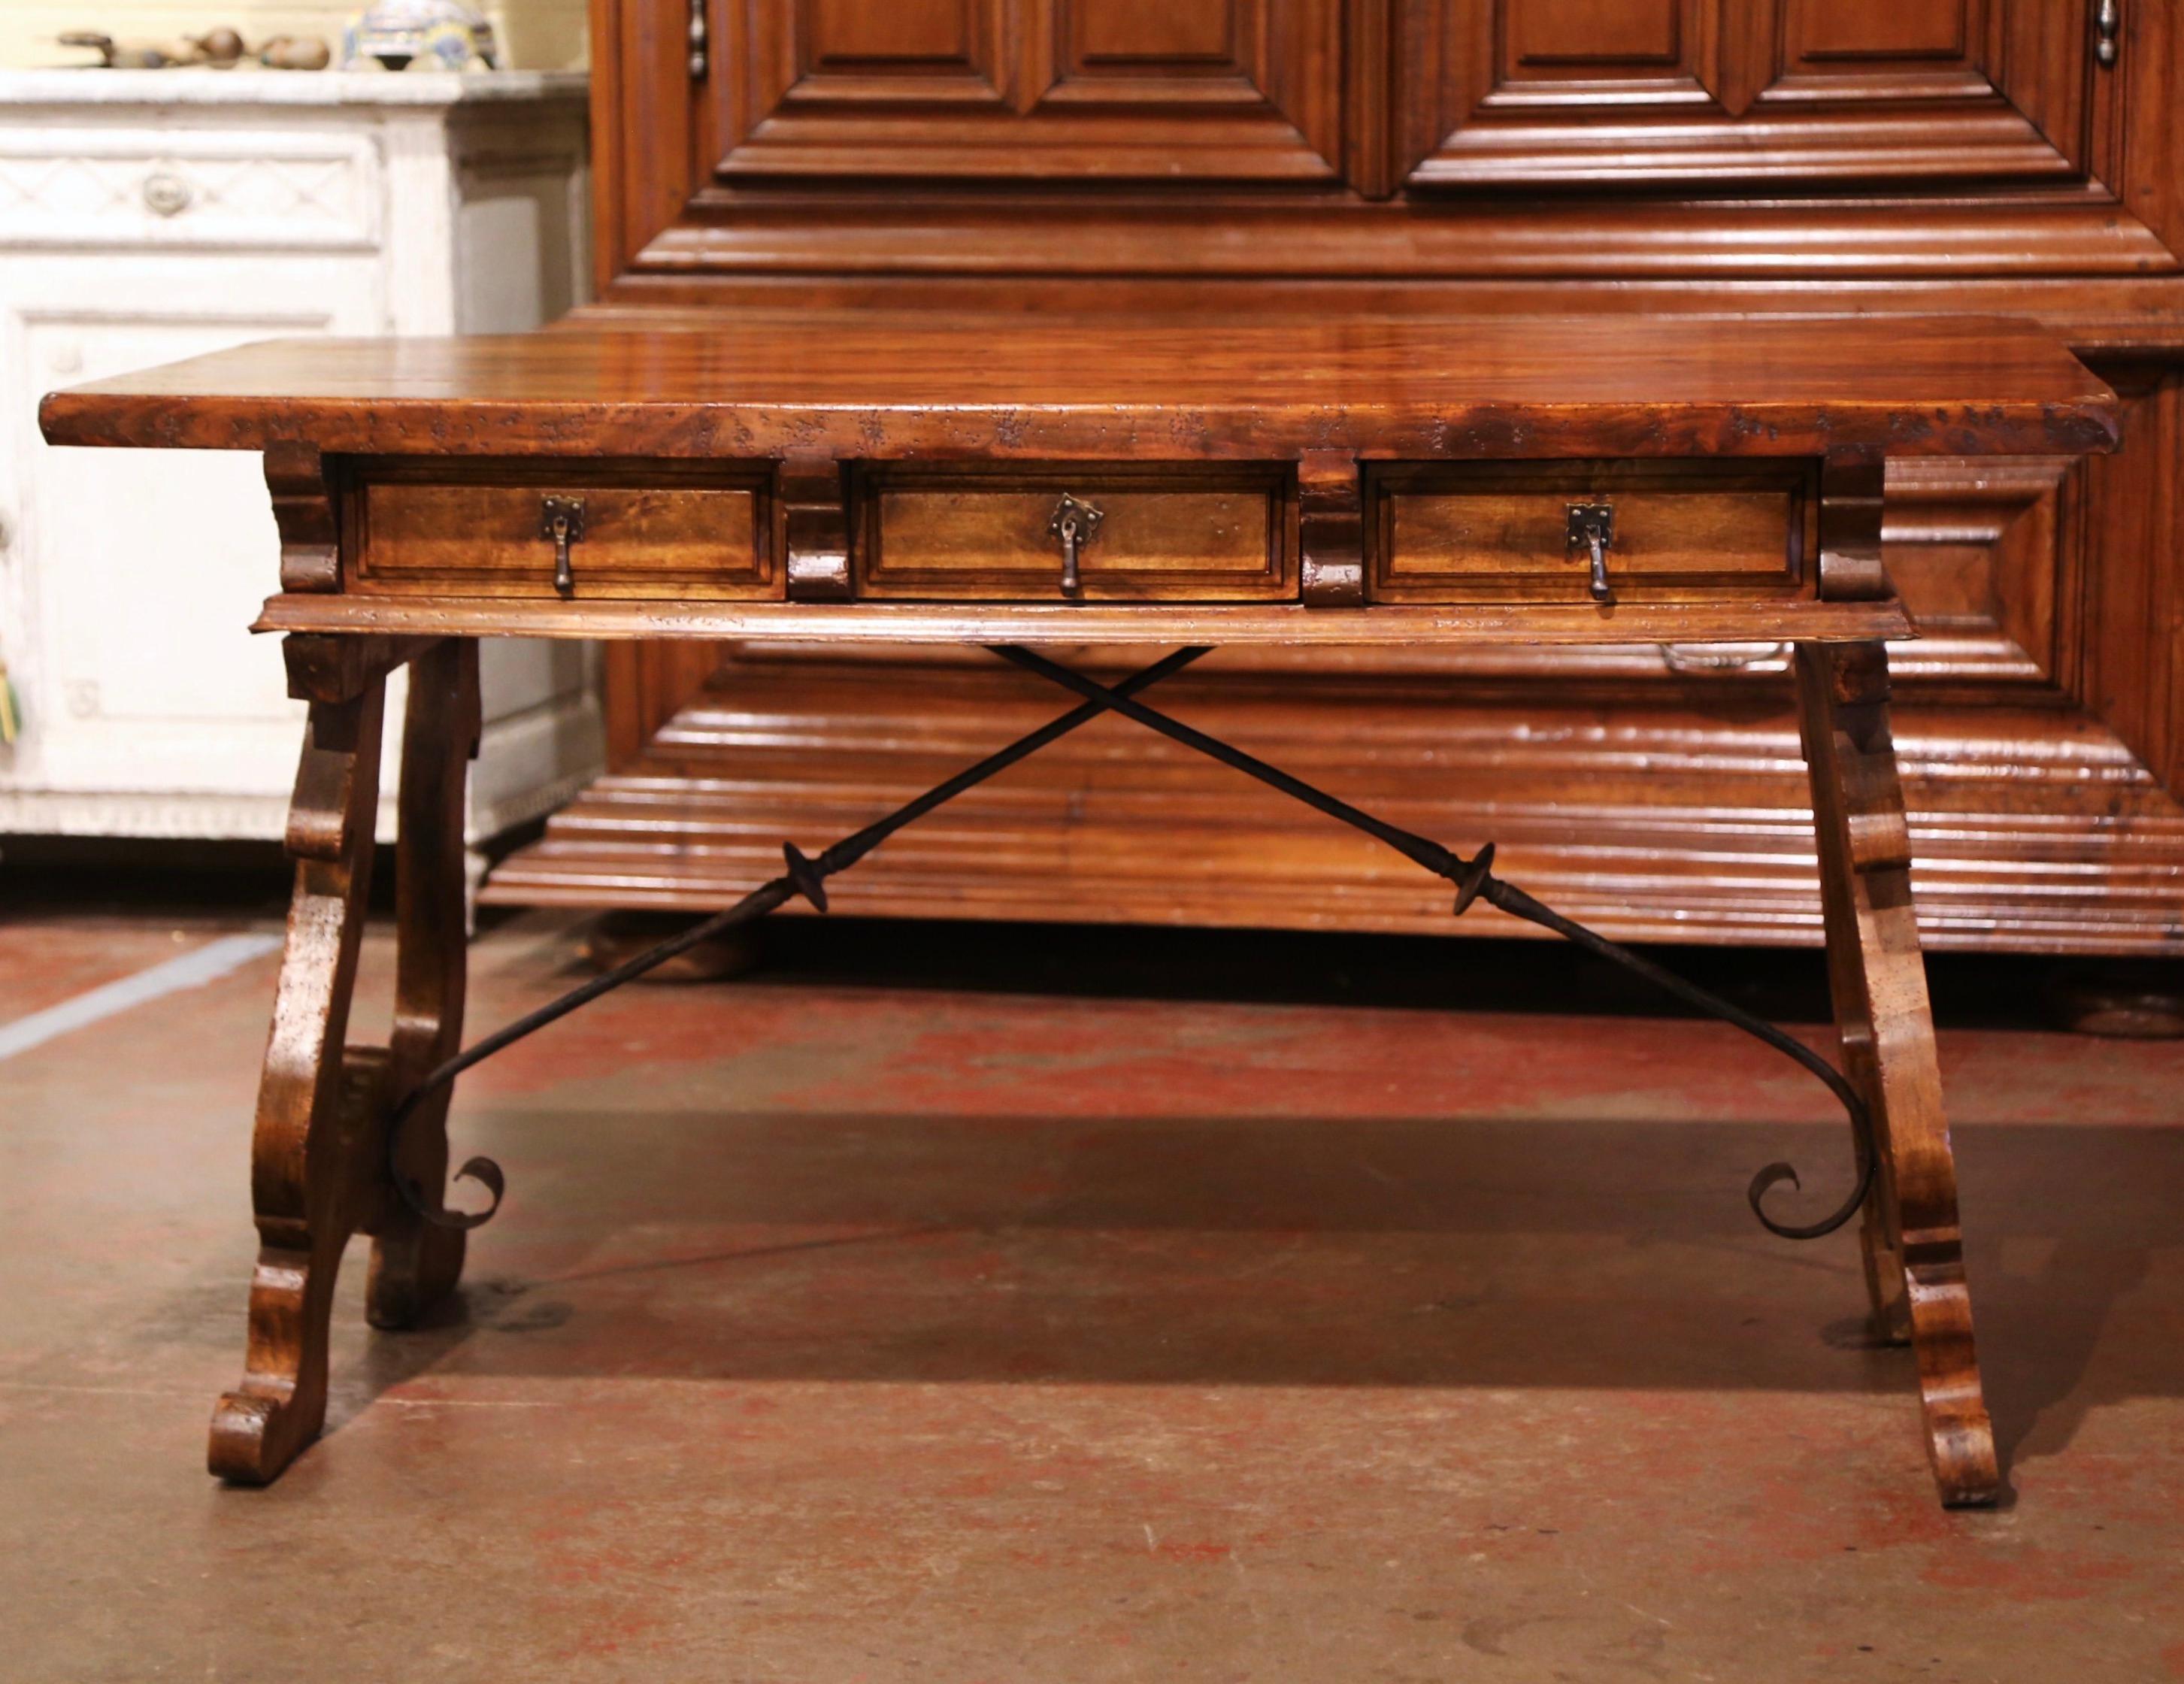 Add an elegant focal point to your study or library with this antique fruitwood desk. Carved in Spain circa 1920, the trestle table stands on two intricate carved legs connected with a thick forged iron stretcher. The rectangular desk features three